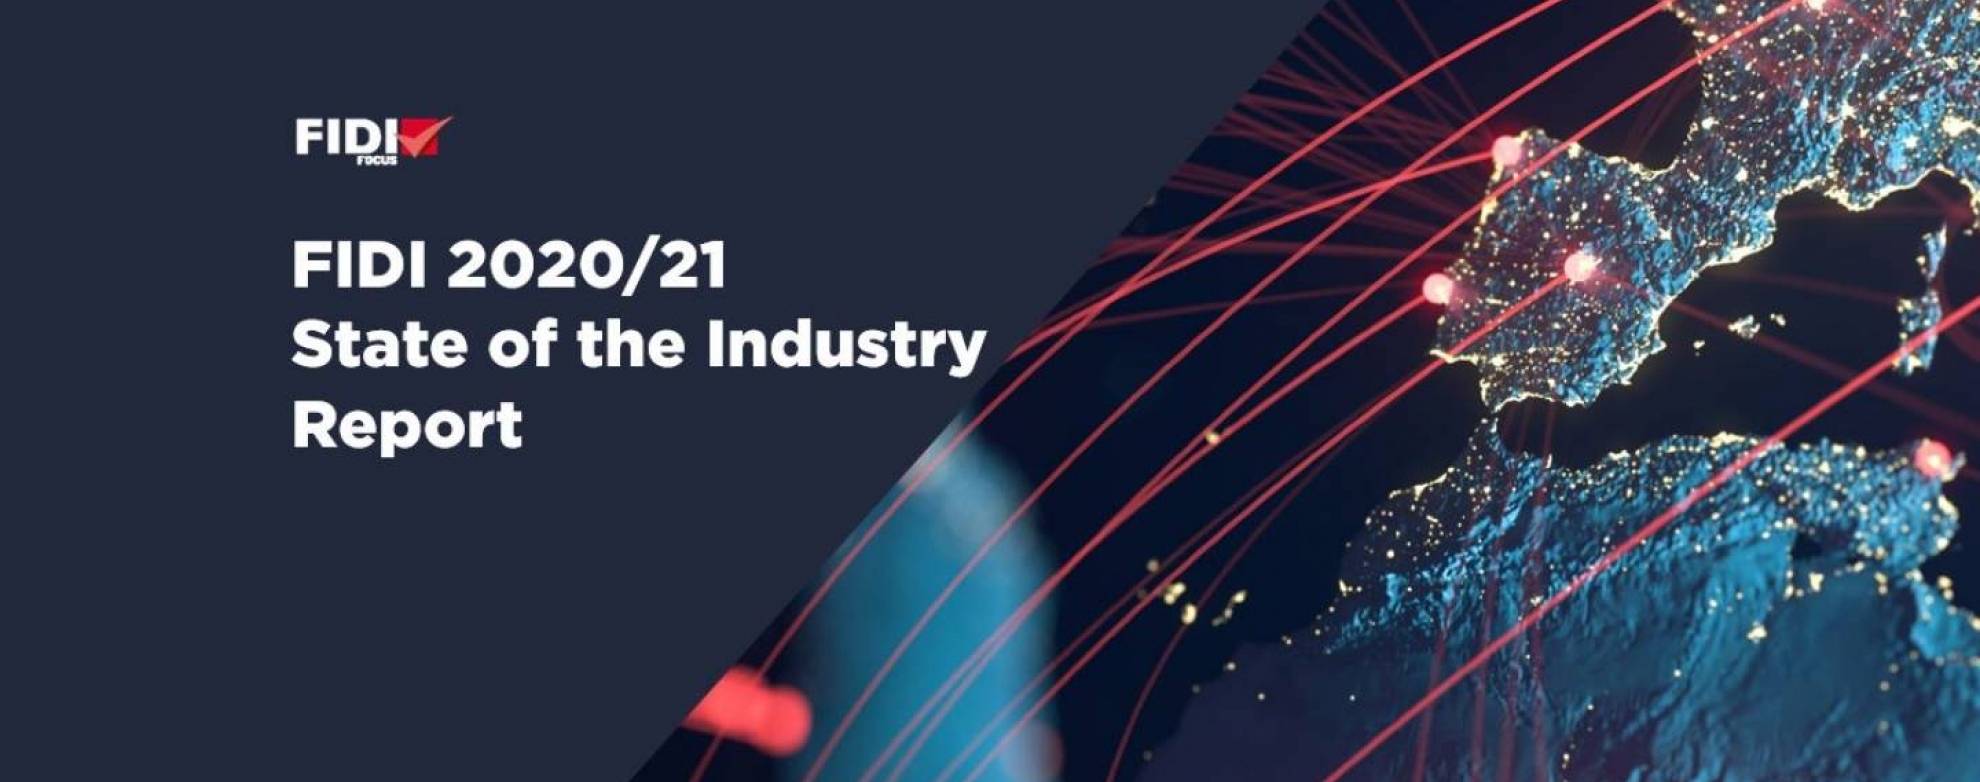 2020/21 State of the Industry report